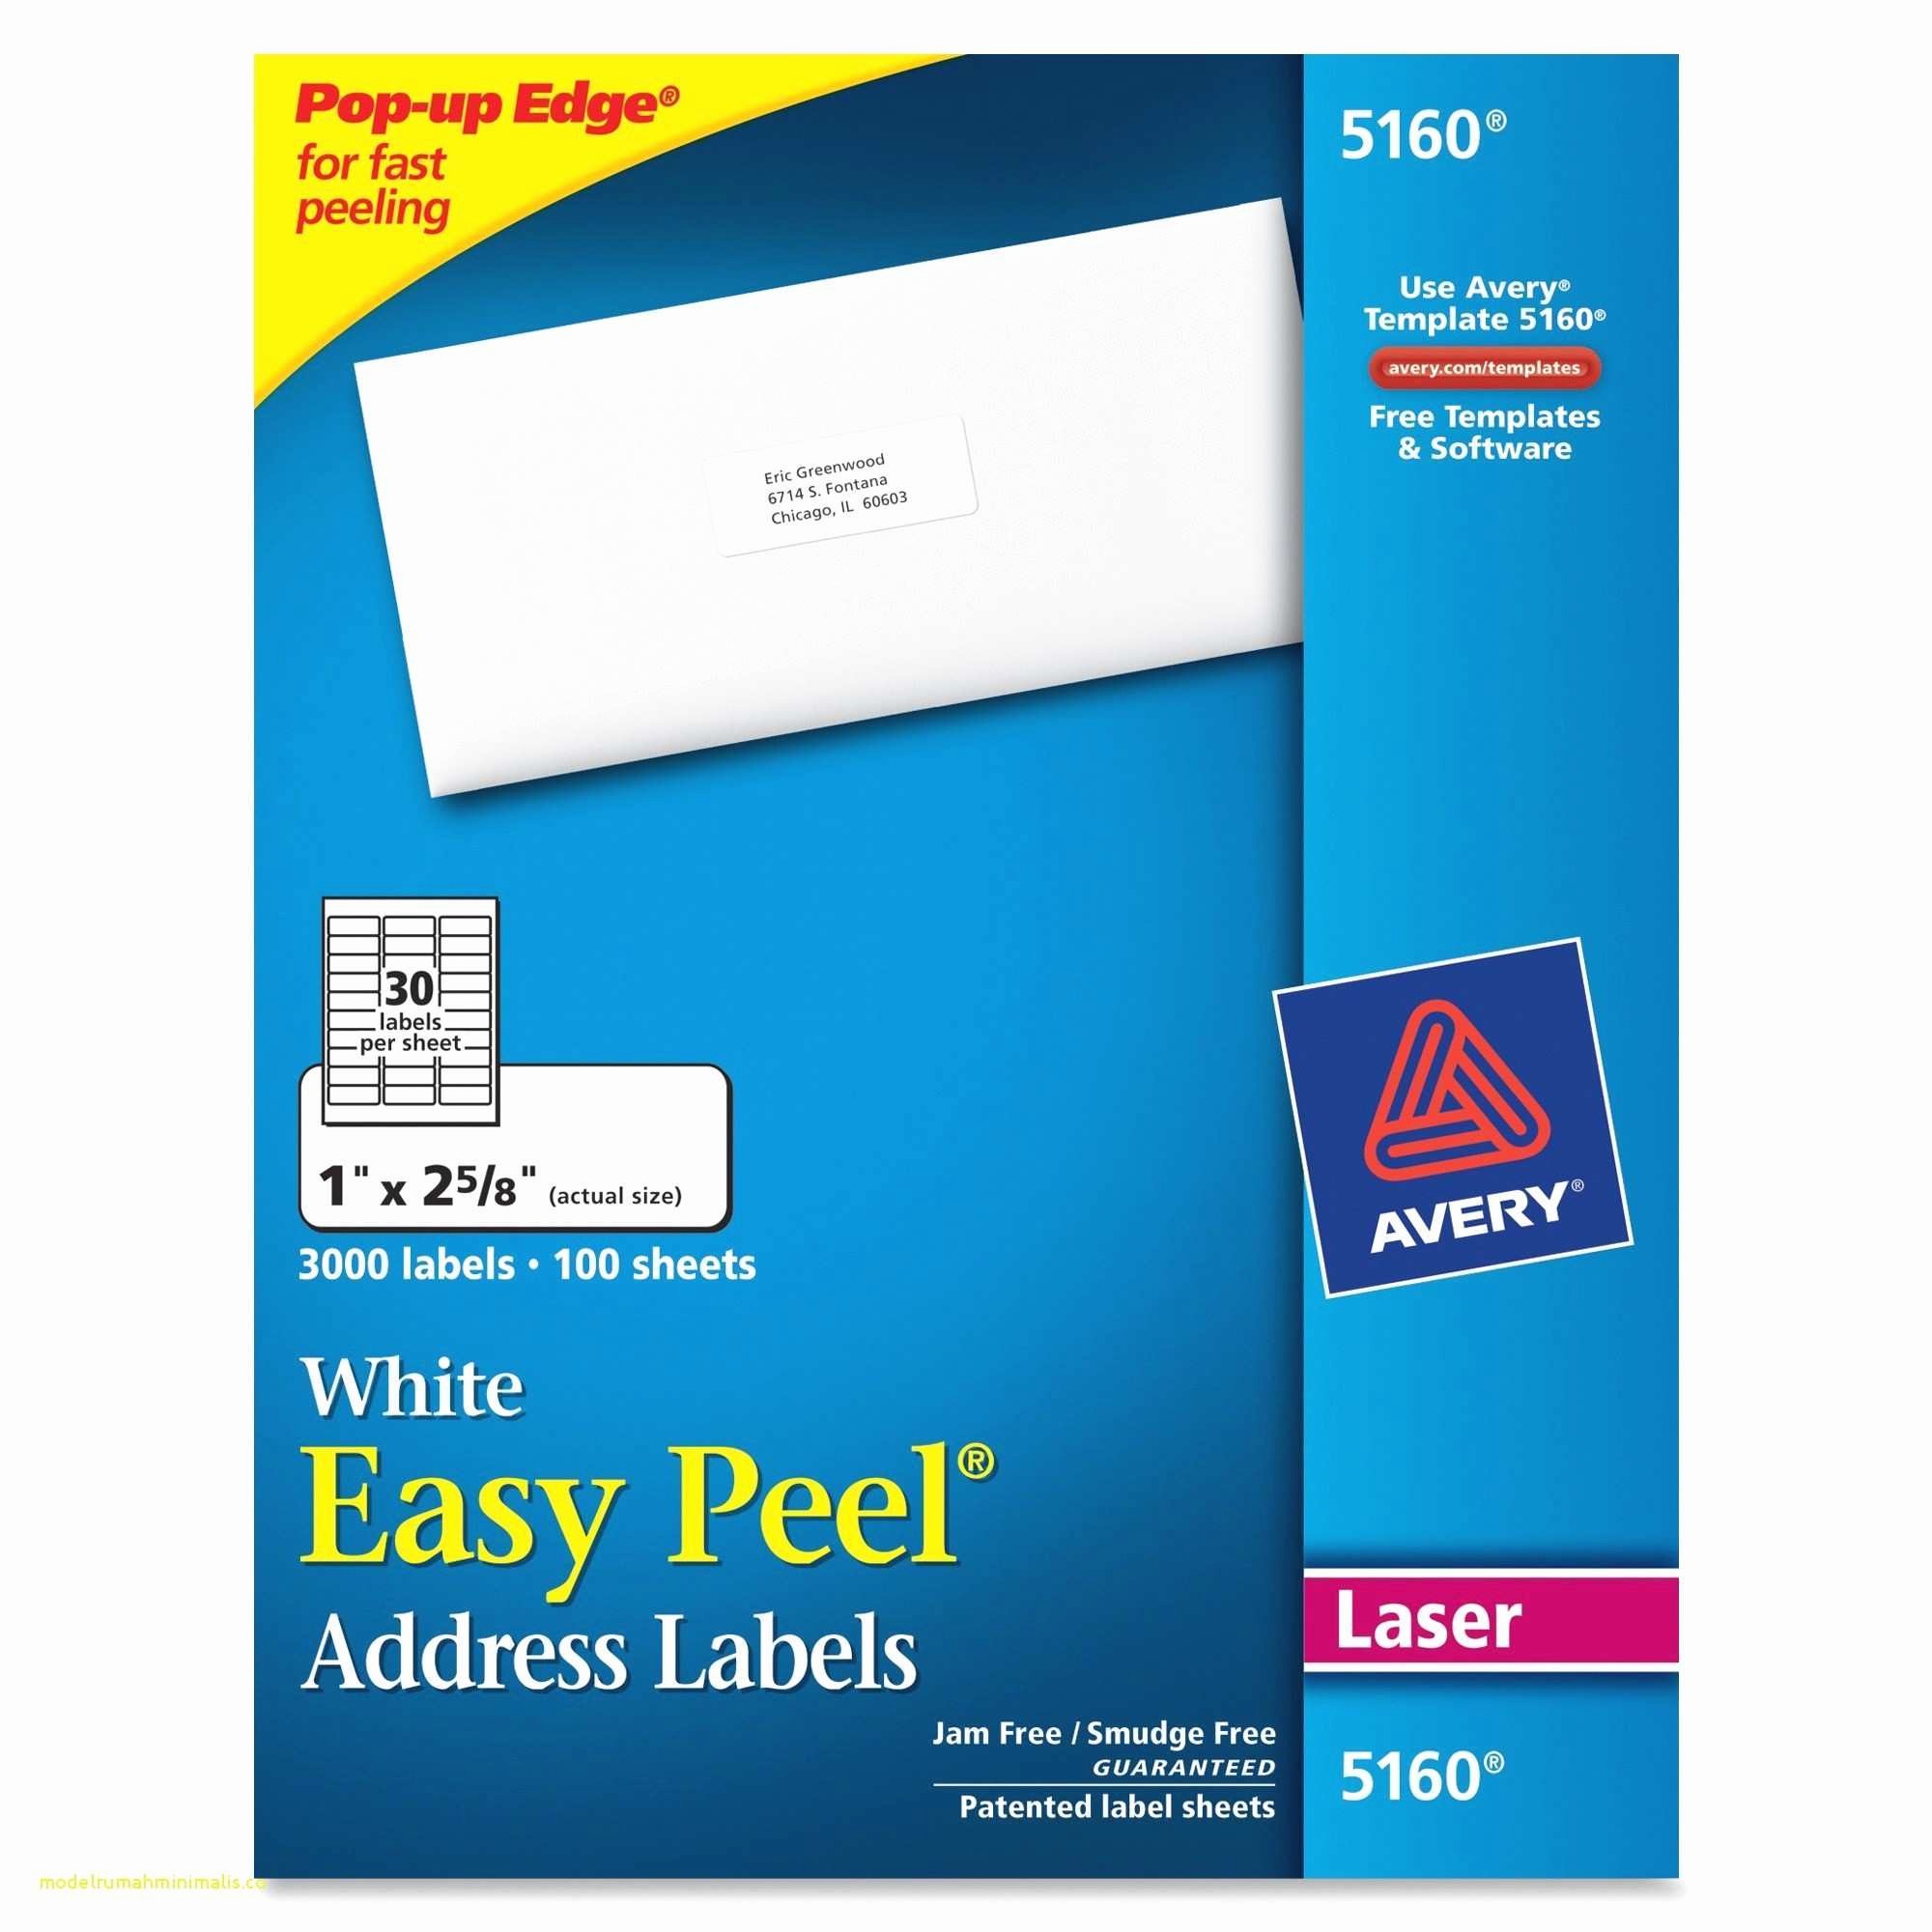 Avery 8167 Template for Pages Best Of New Avery Return Address Label Template 5167